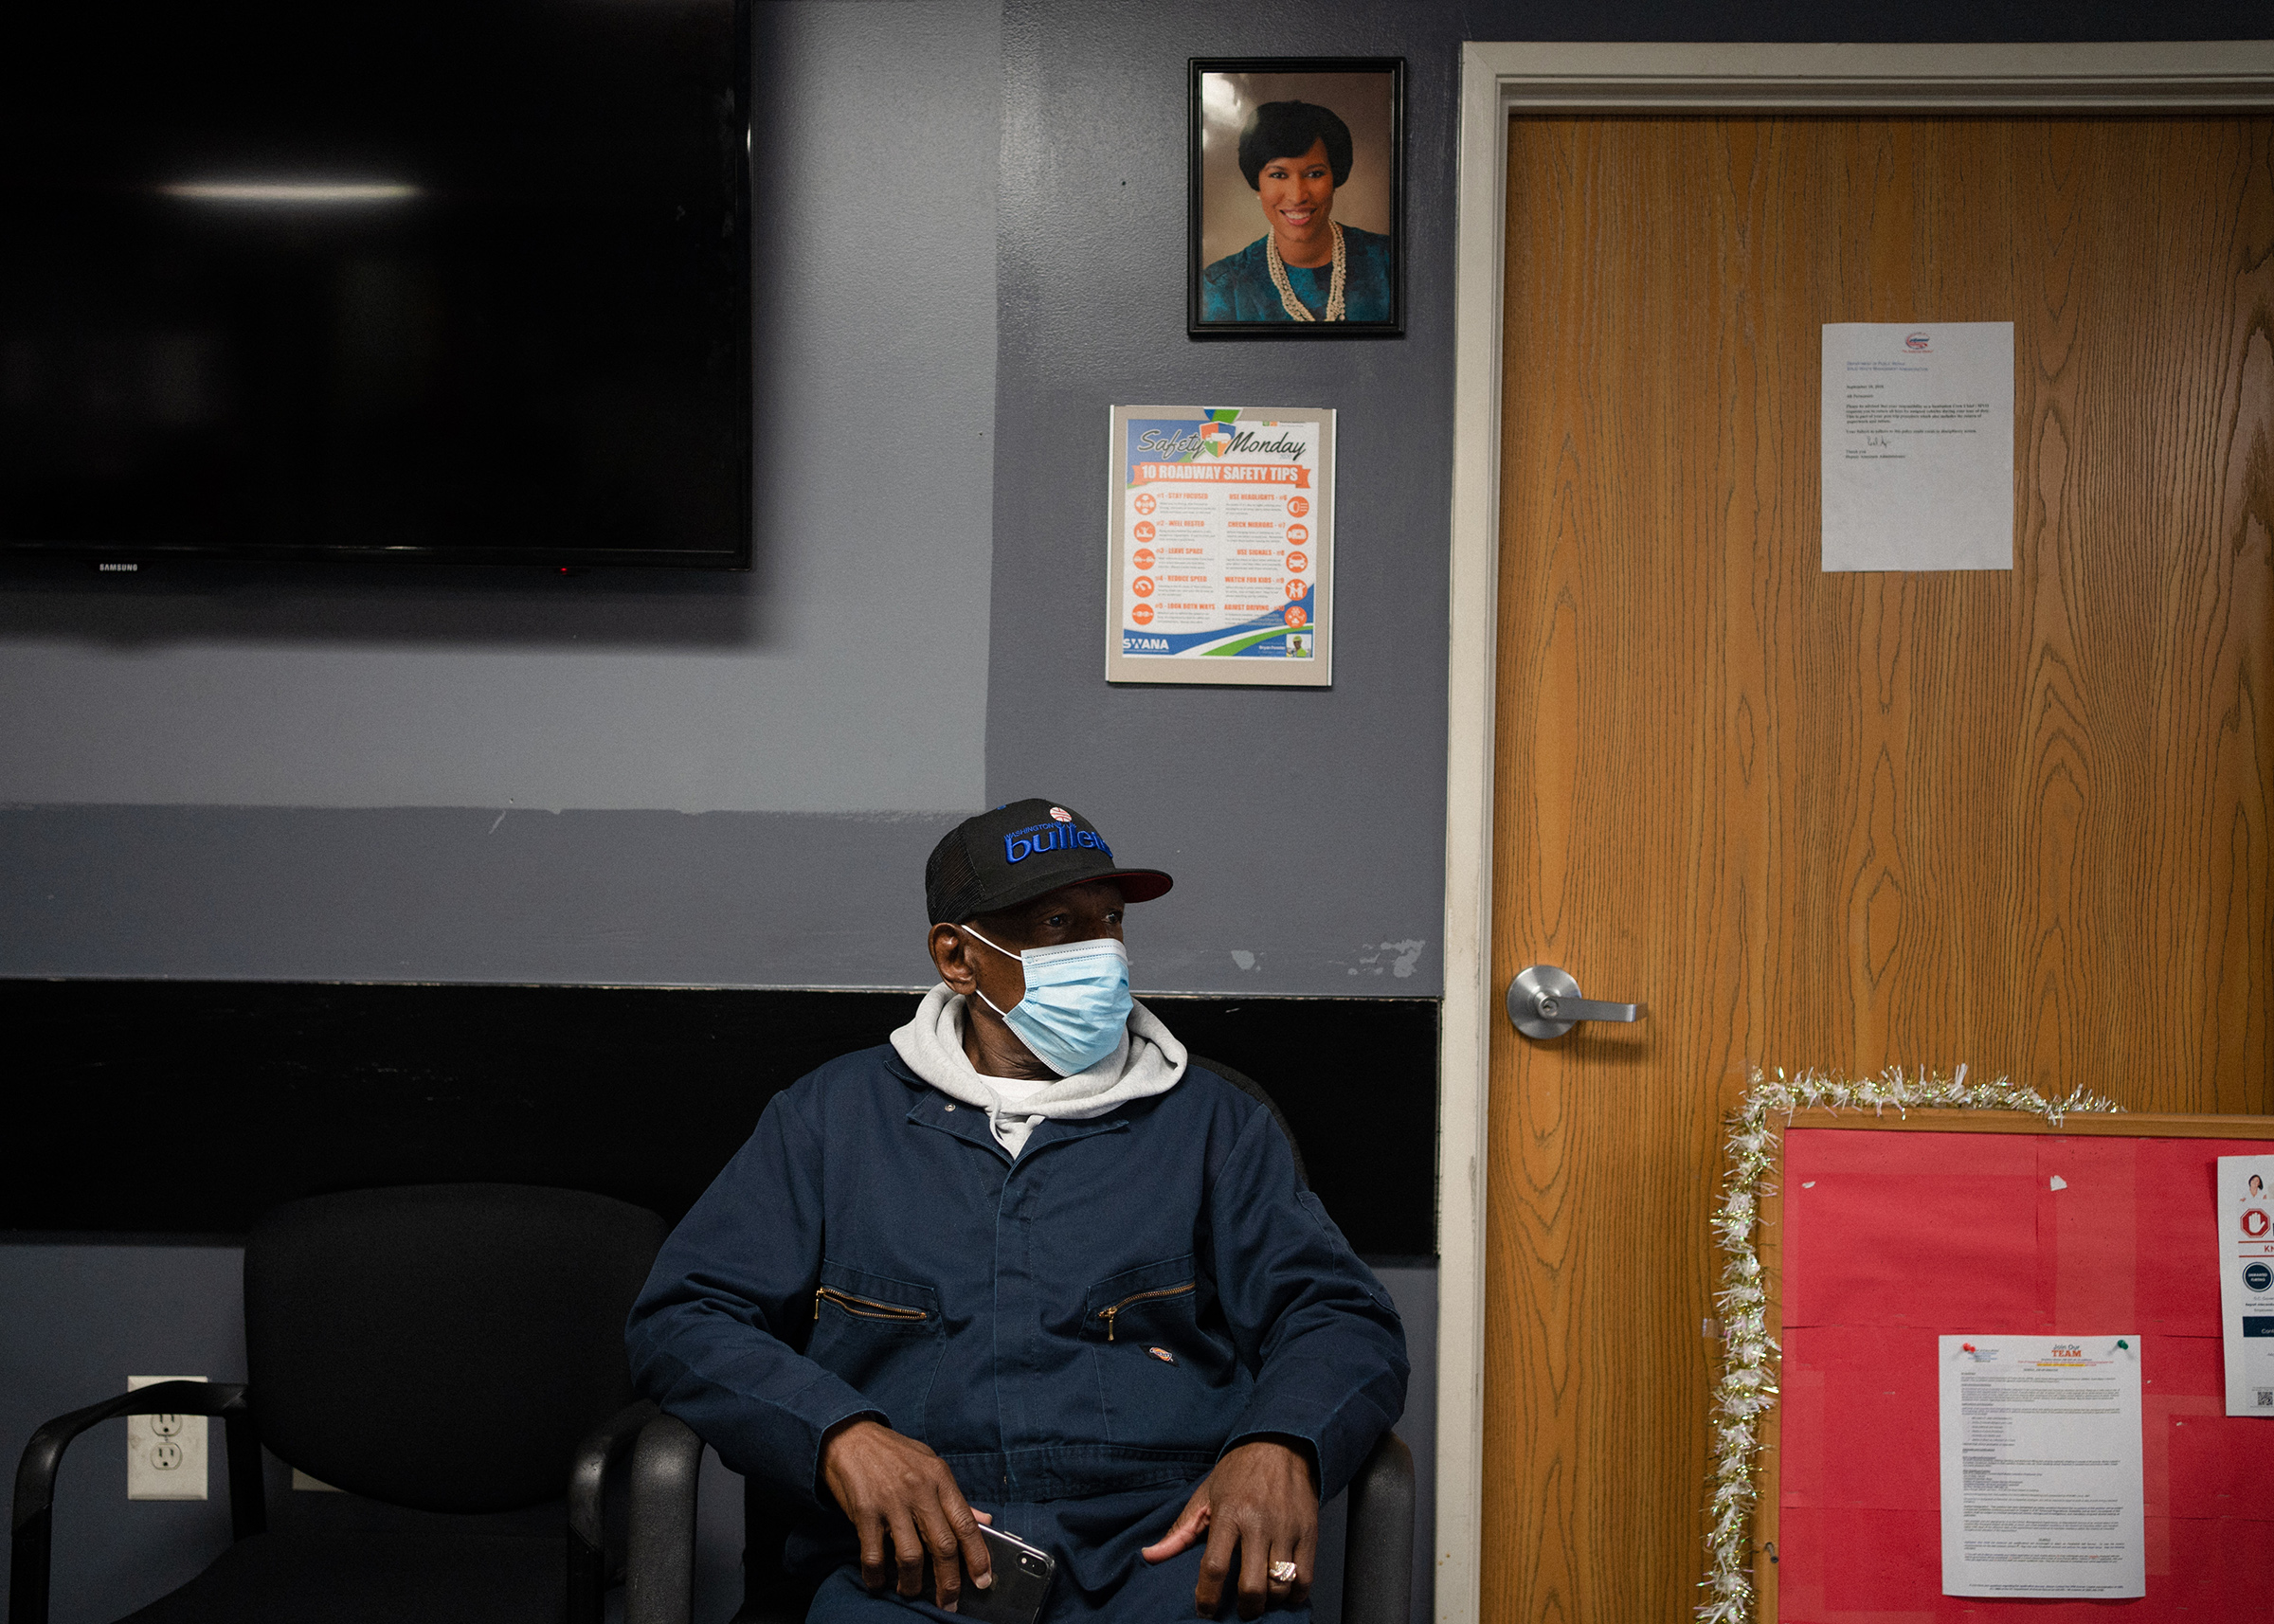 Sanitation Worker, Vincent Walker, 72, sits inside the Larry Hutchins Building at the DC Department of Public Works Solid Waste Collections Division in Northeast Washington, DC, below a portrait of Mayor Muriel Bowser.